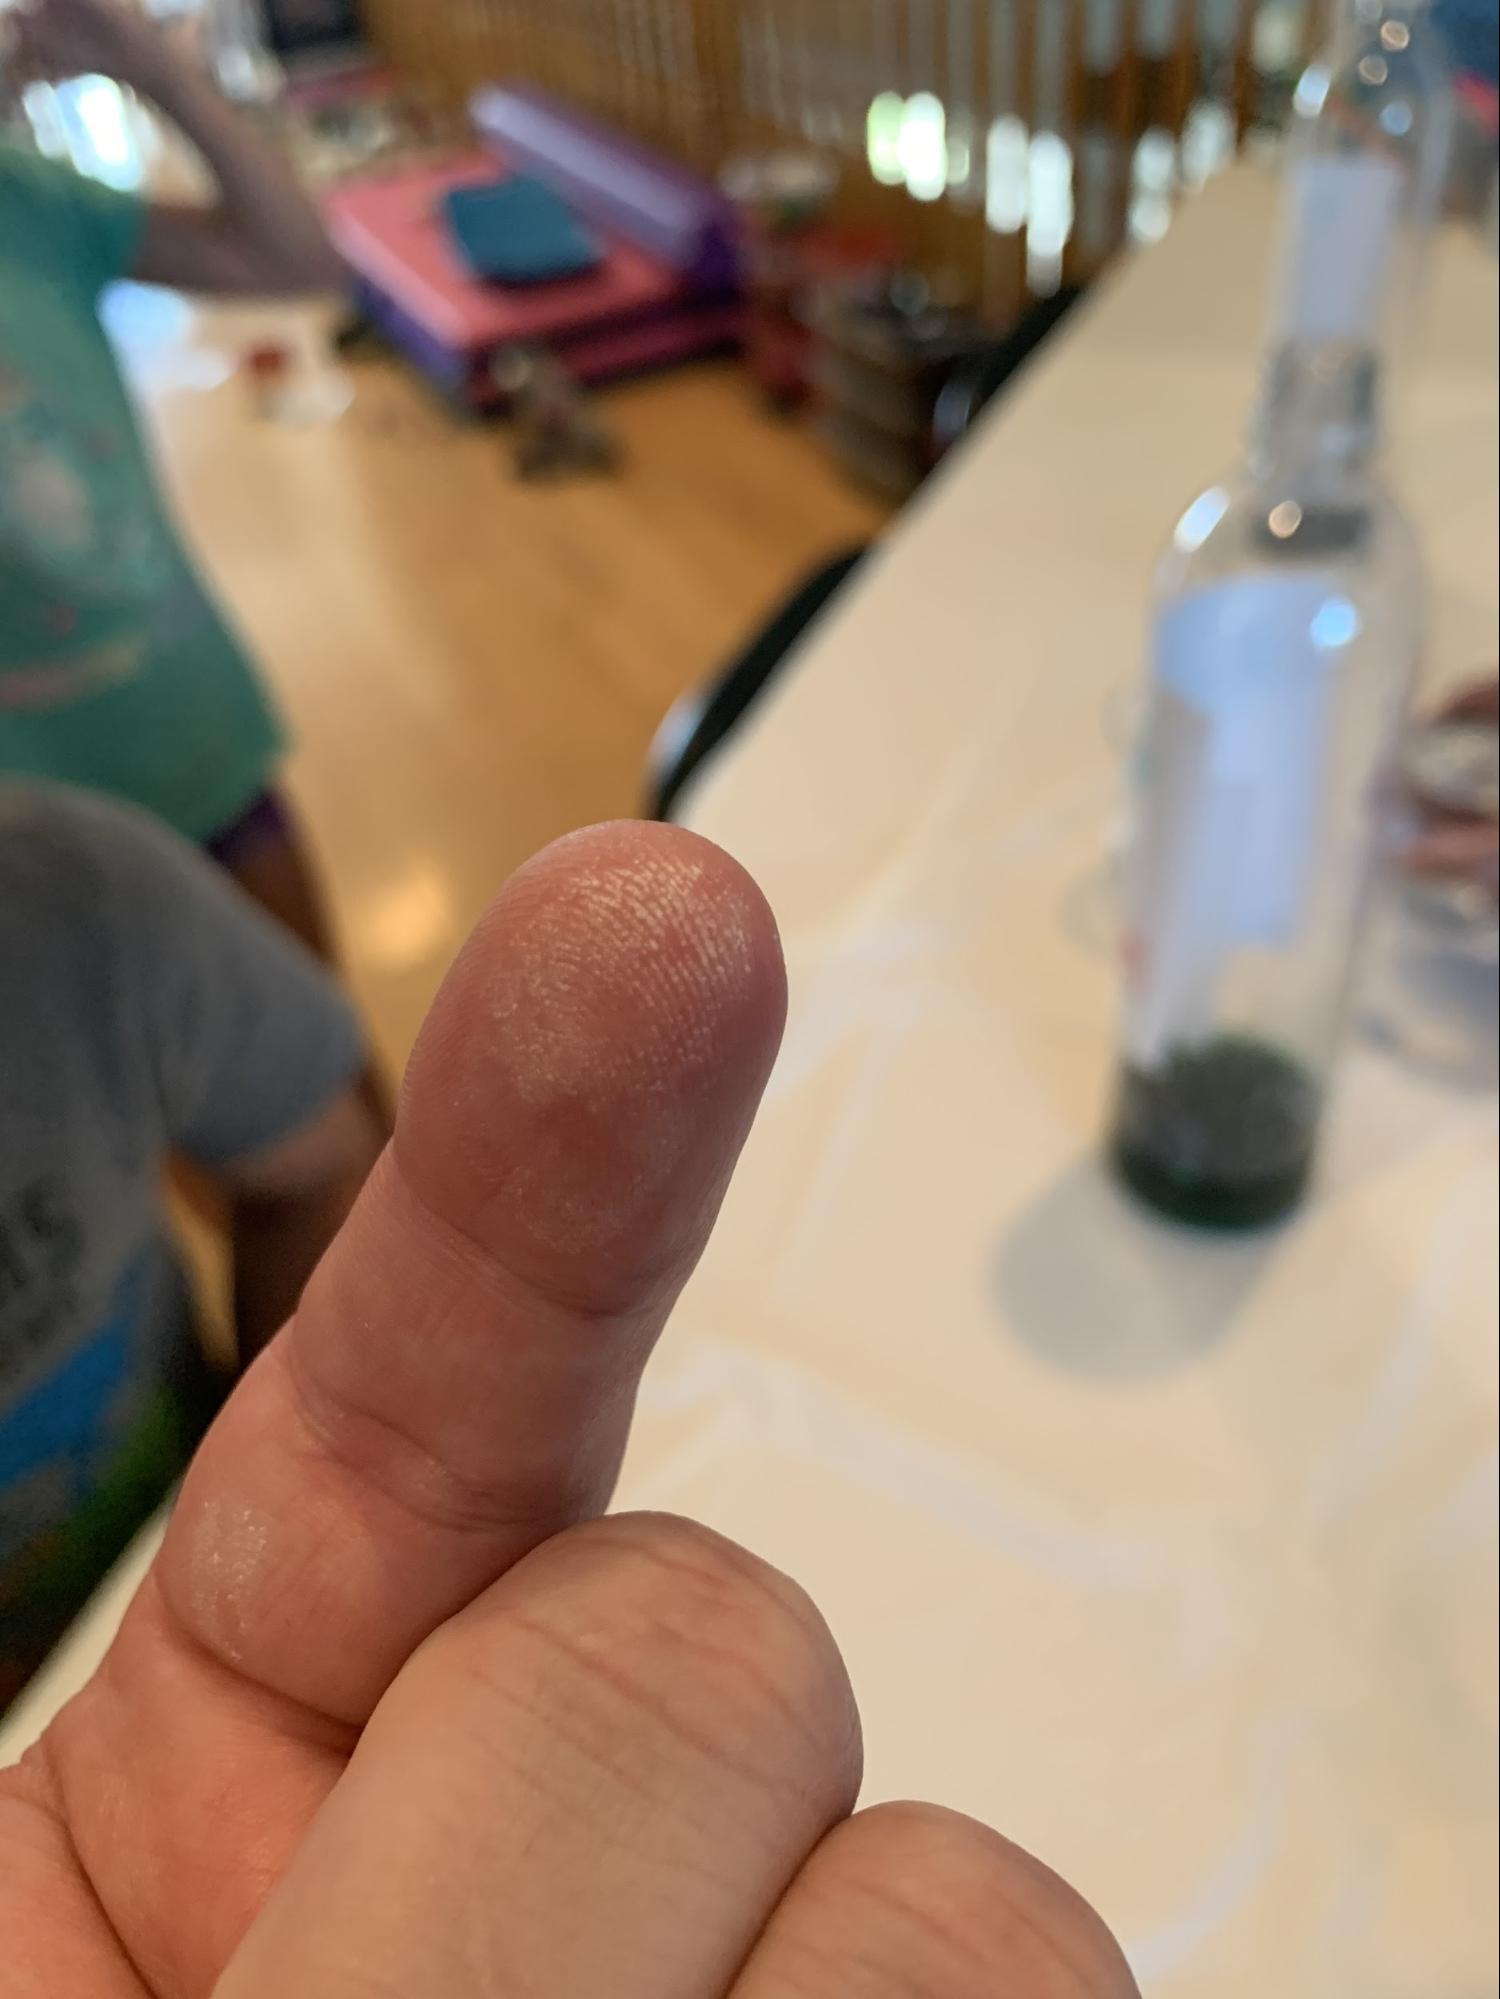 finger with irritated skin from touching hydrogen peroxide in Elephant Toothpaste experiment